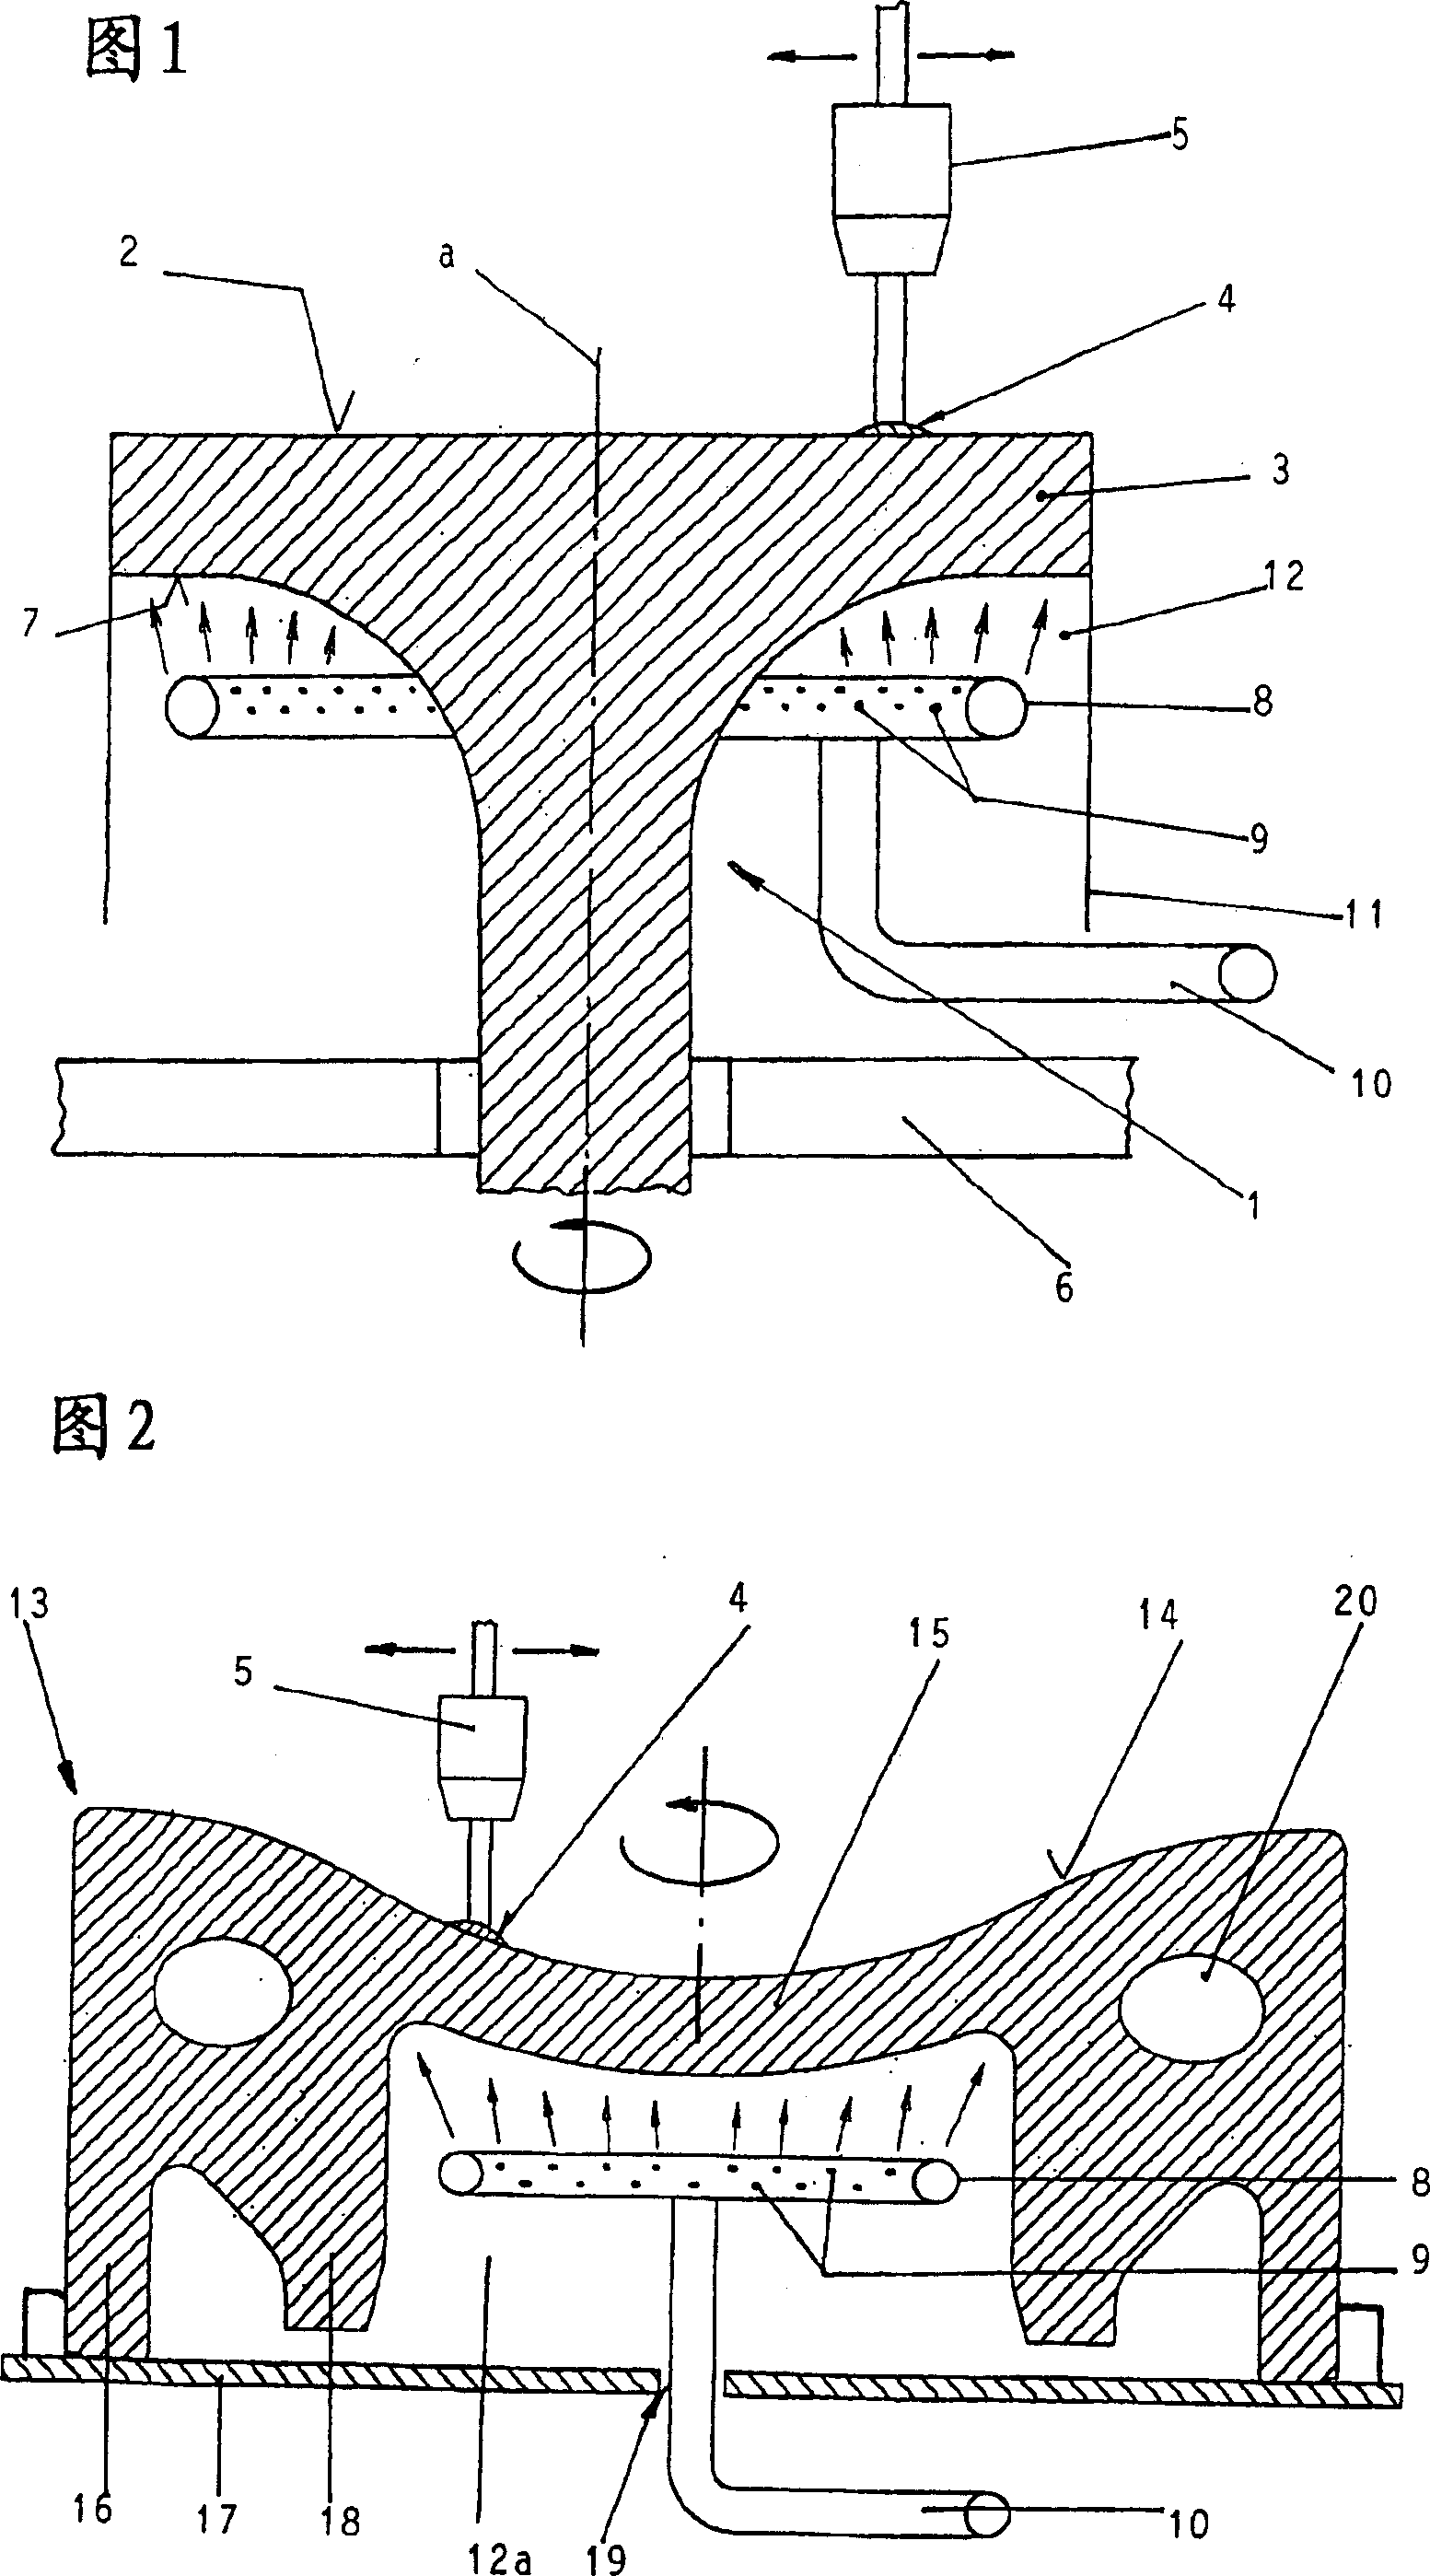 Method for providing a component of a large machine with a protective coating